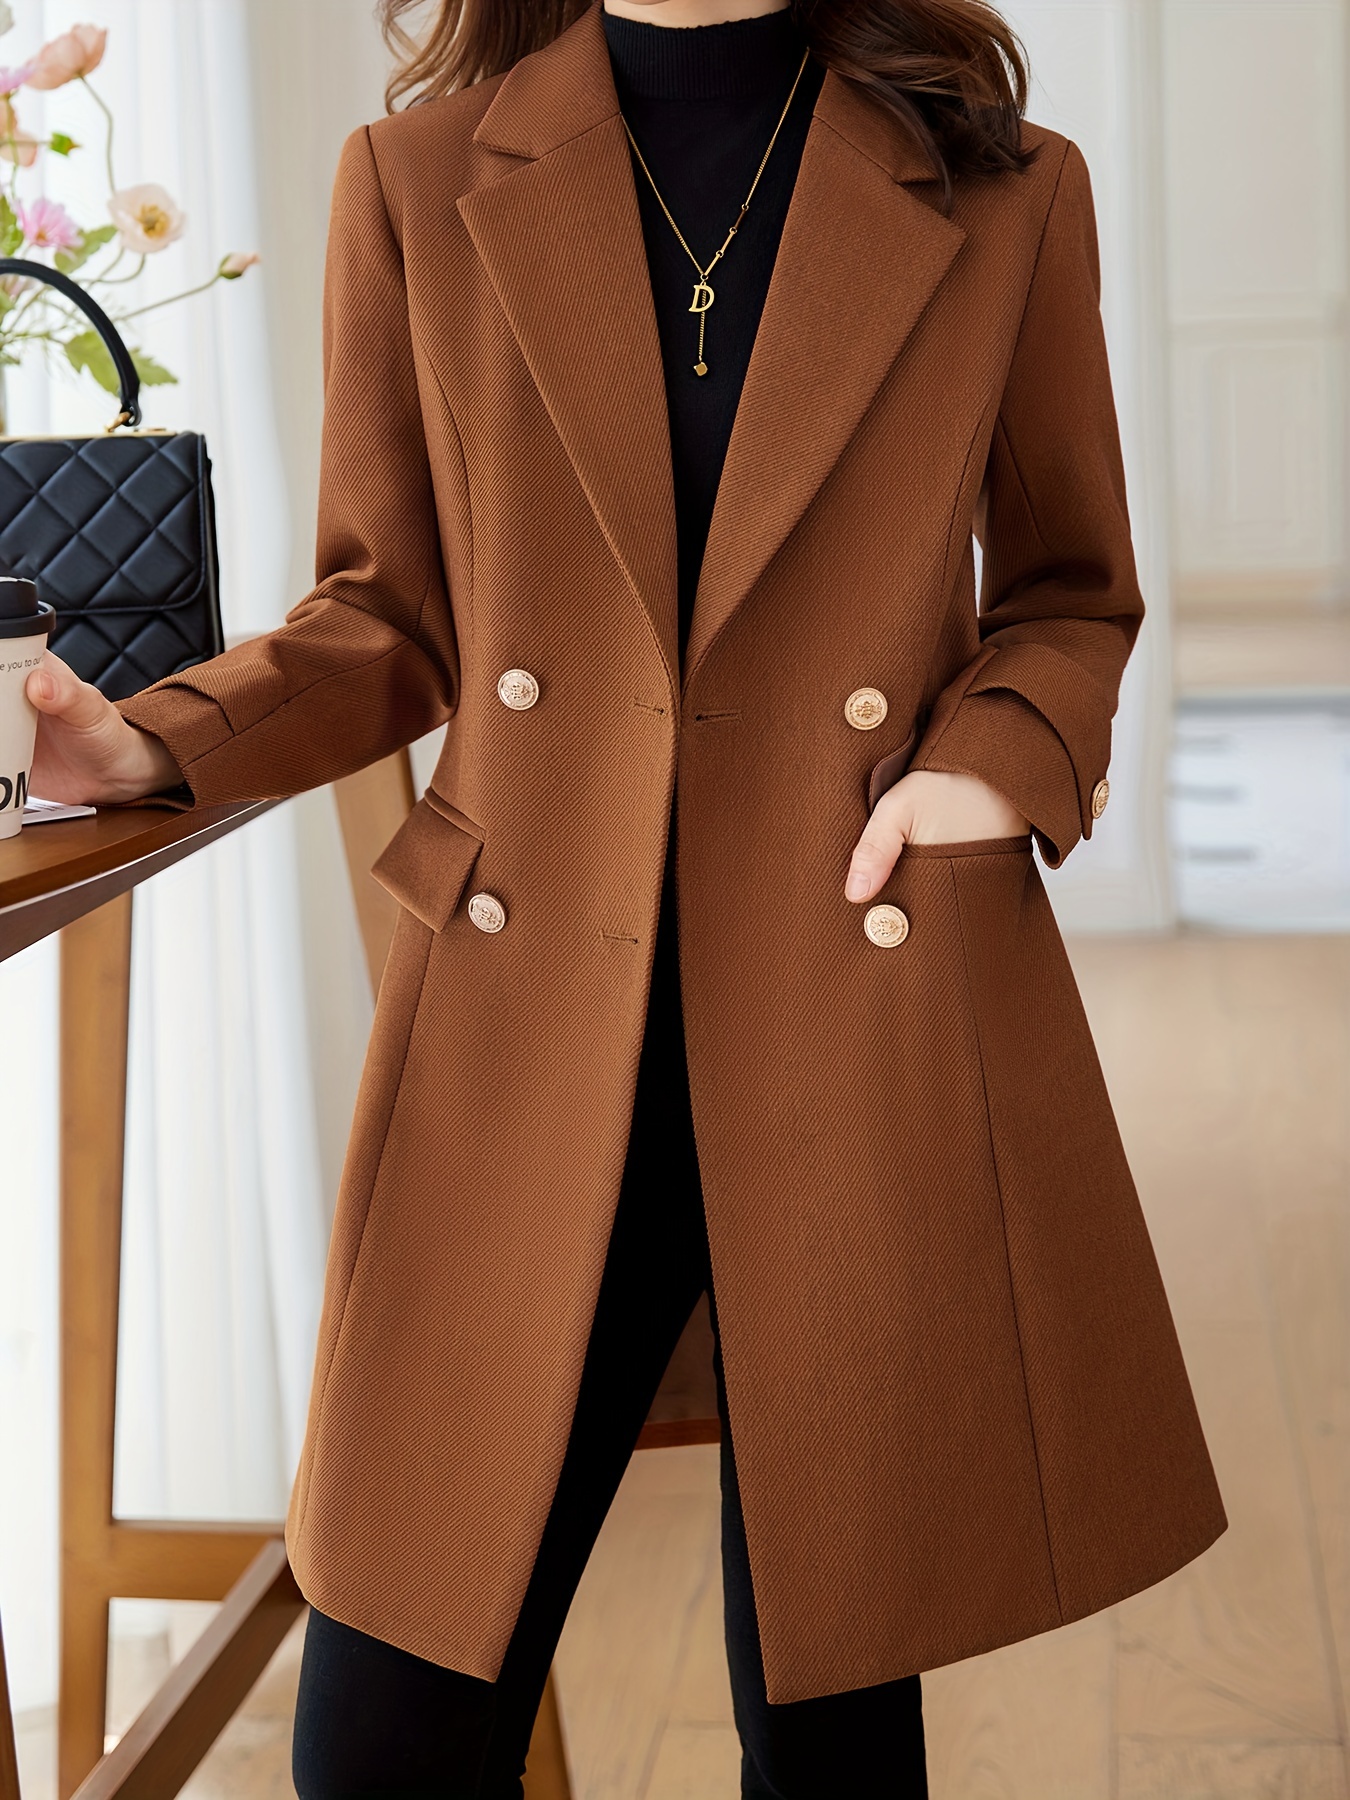 solid double breasted lapel overcoat elegant long sleeve mid length coat for fall winter womens clothing details 7